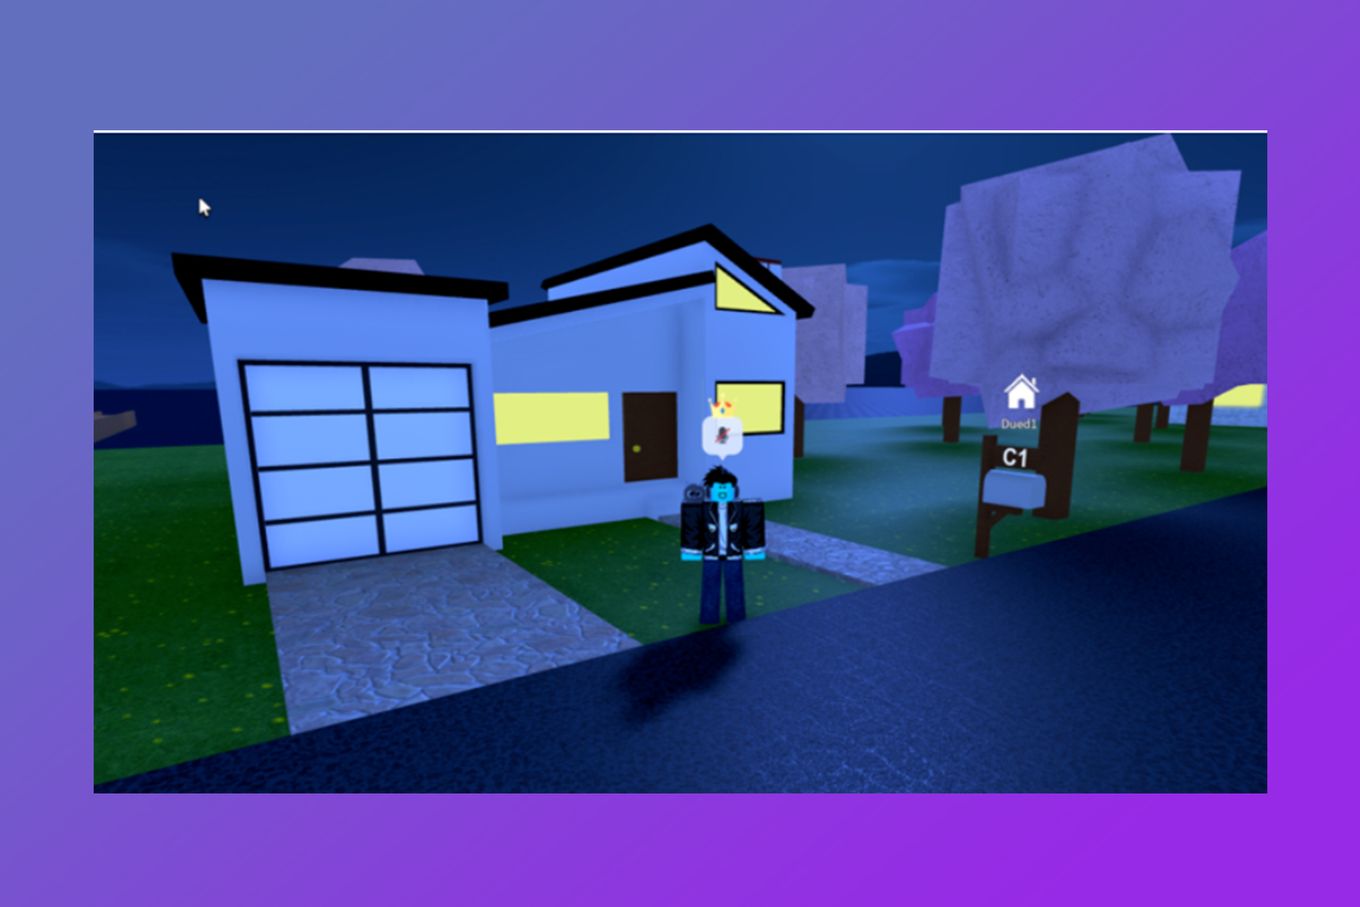 10 Oldest Roblox Games Ever Created 